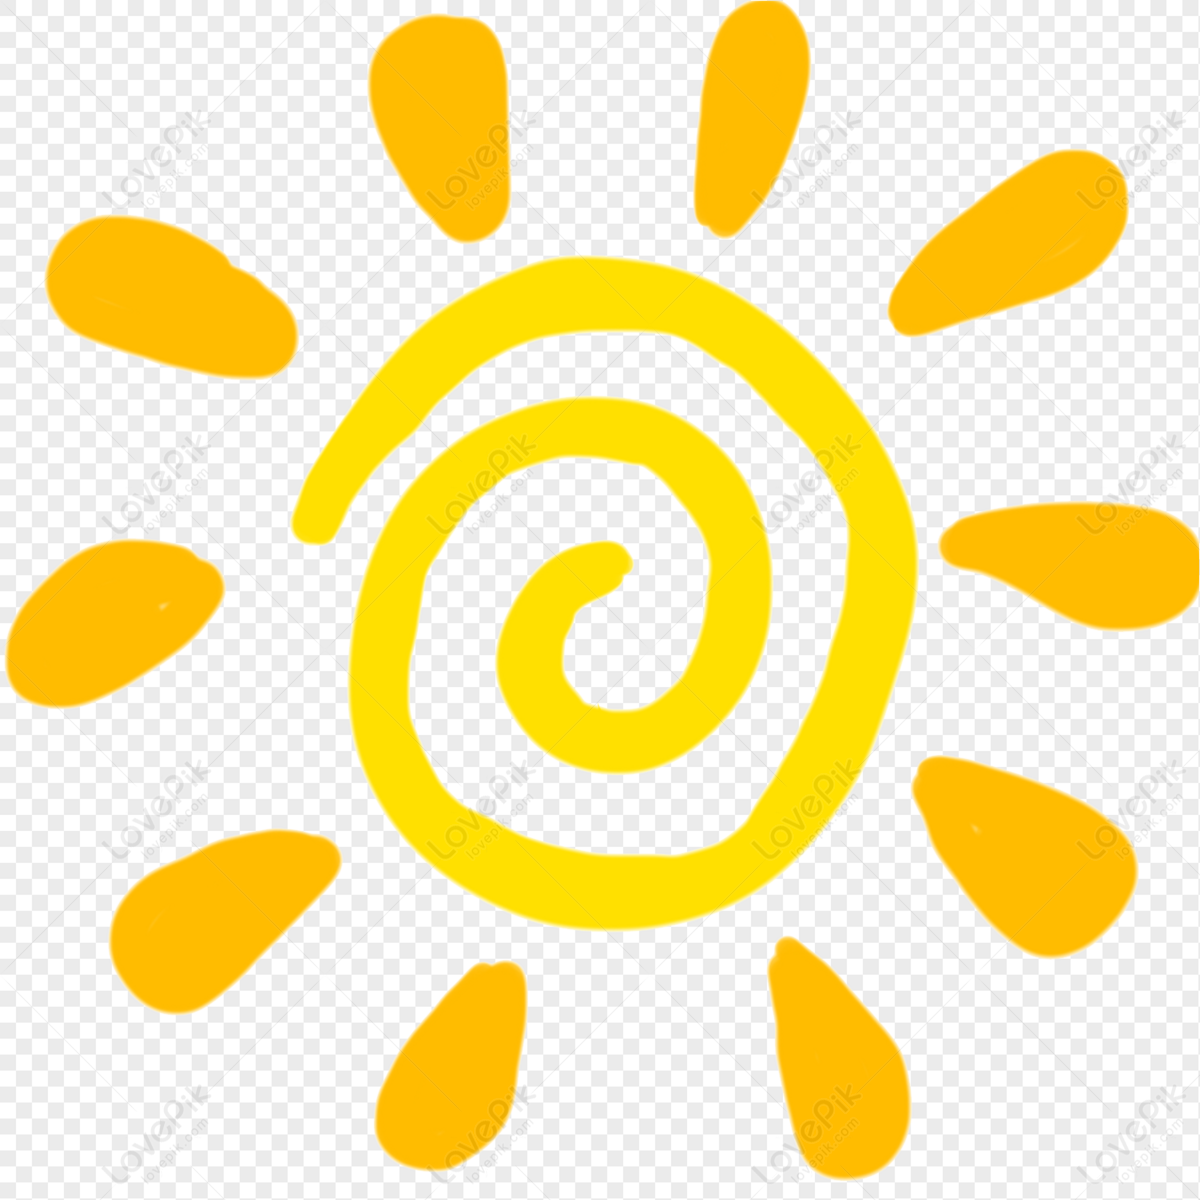 Sun PNG Transparent Image And Clipart Image For Free Download - Lovepik |  401203507